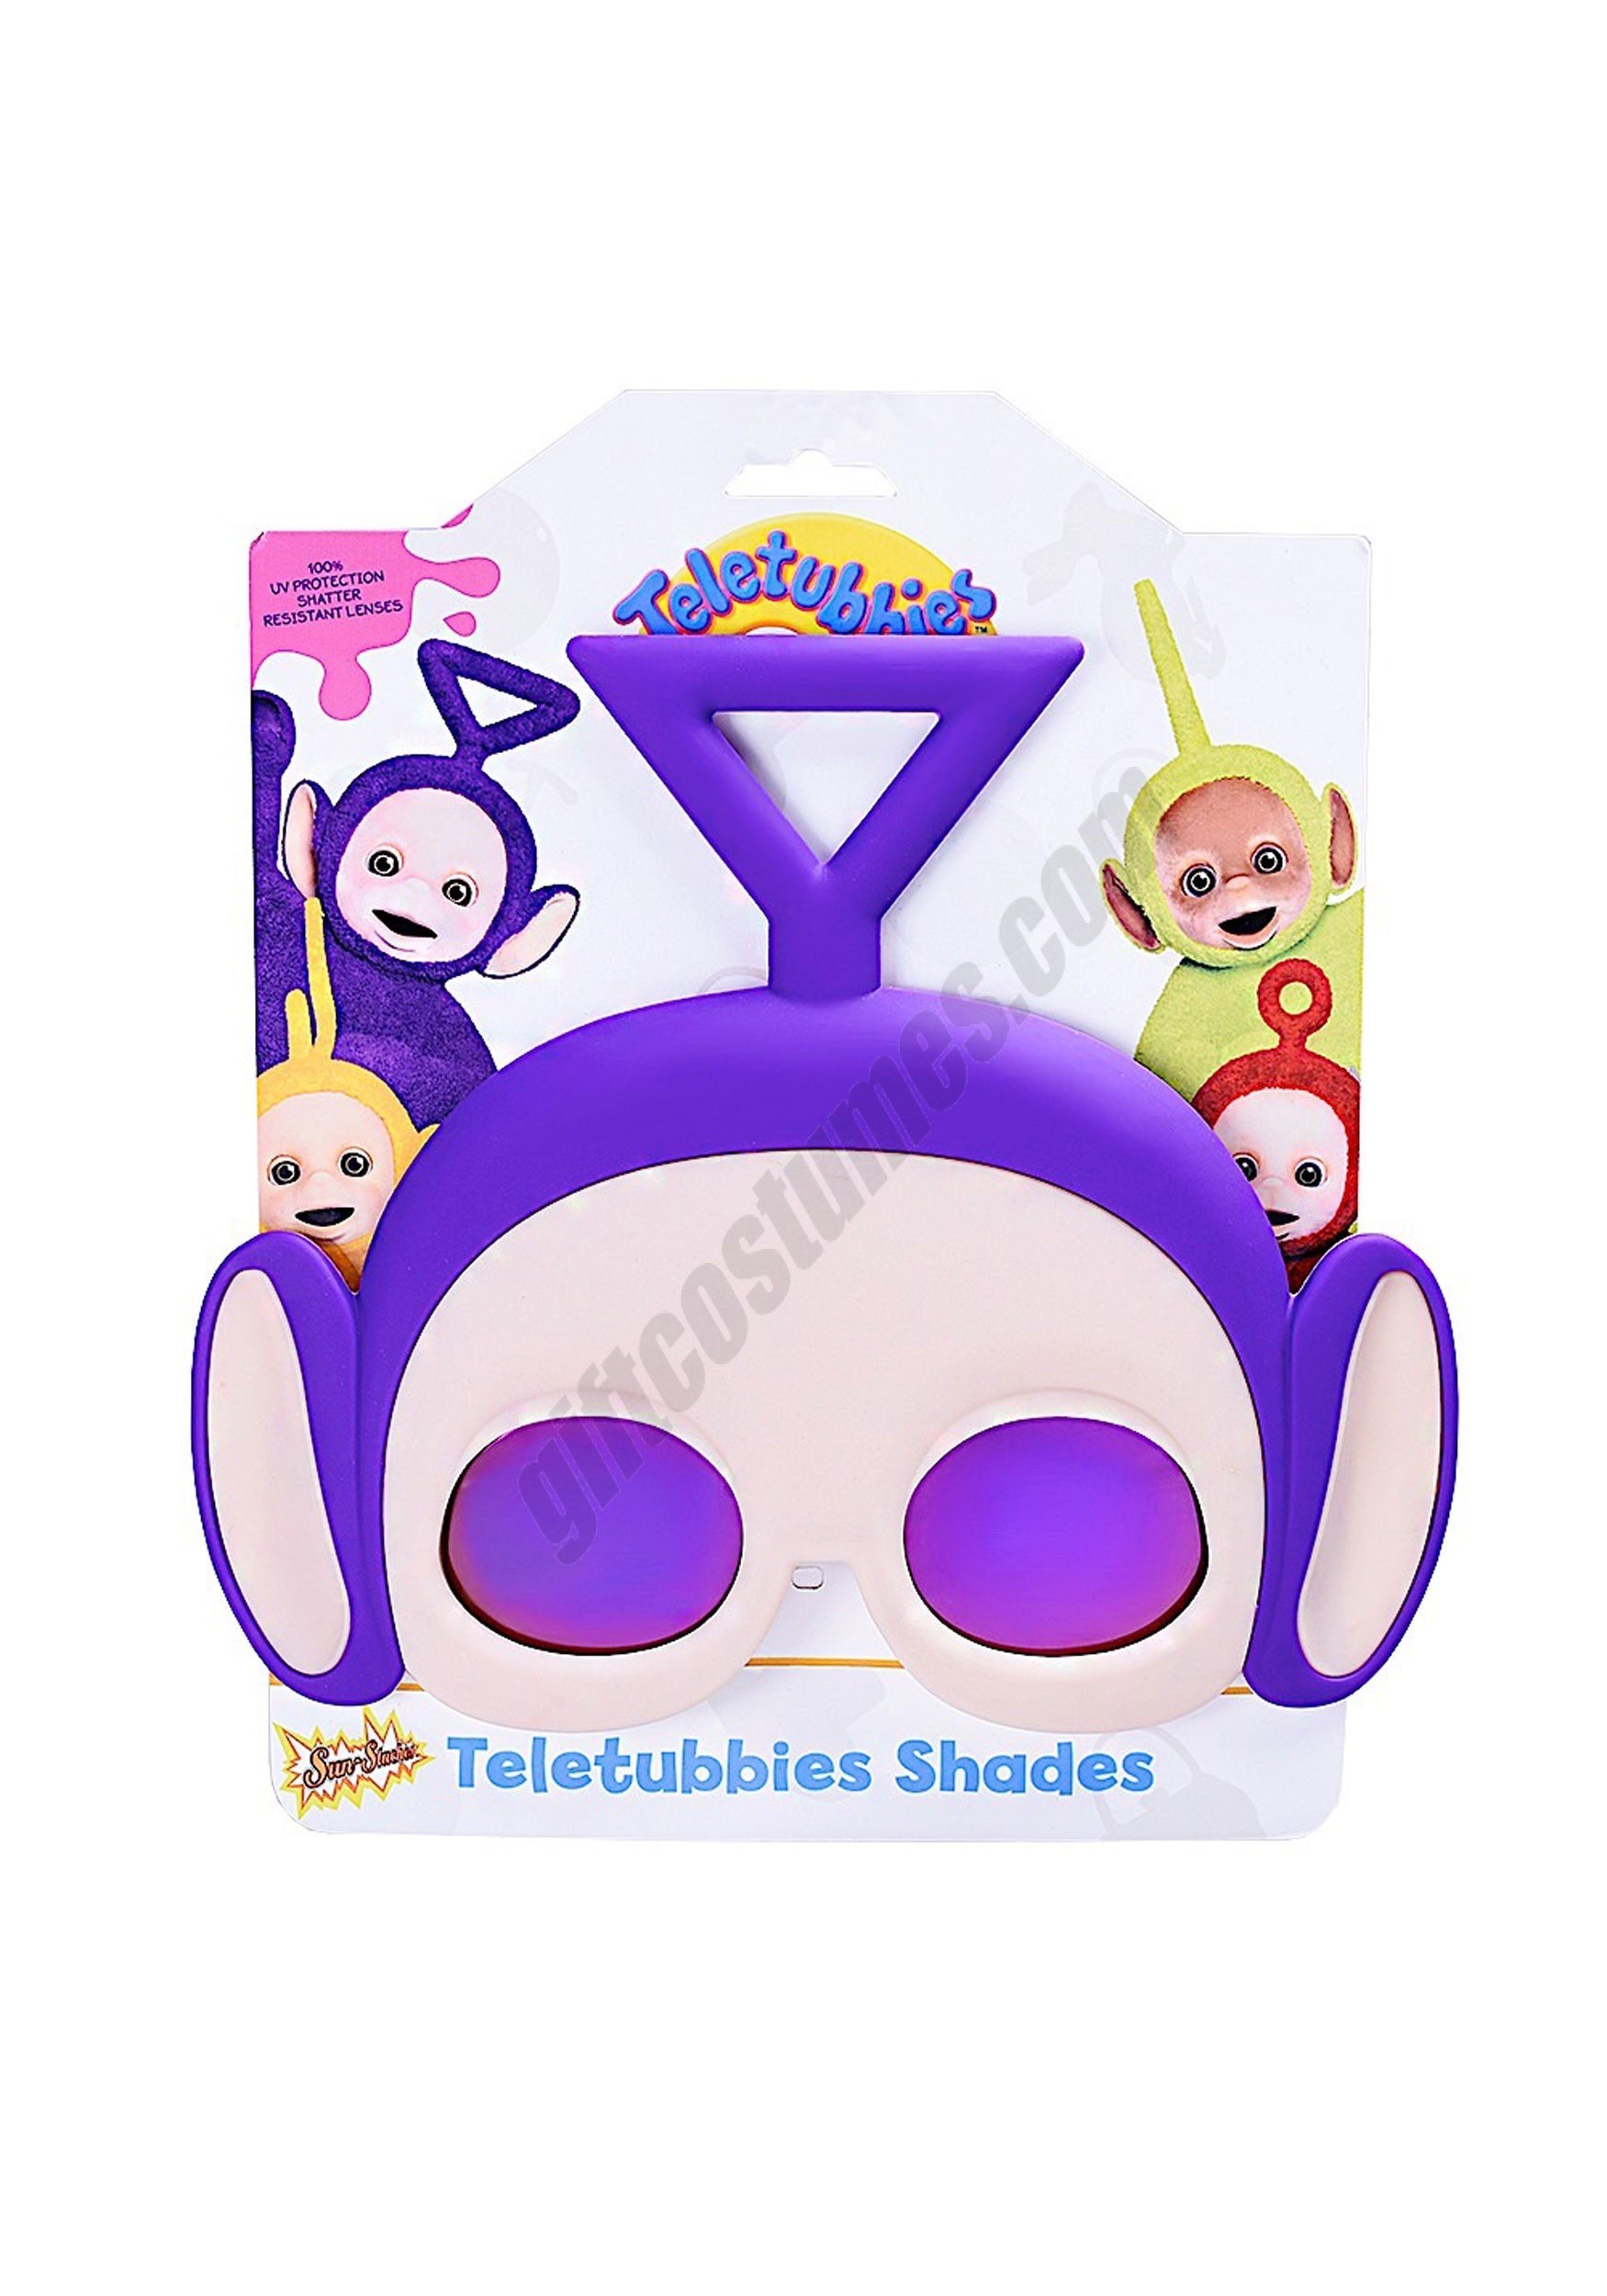 Purple, Teletubbies Tinky Winky Sunglasses for All Ages Promotions - Purple, Teletubbies Tinky Winky Sunglasses for All Ages Promotions